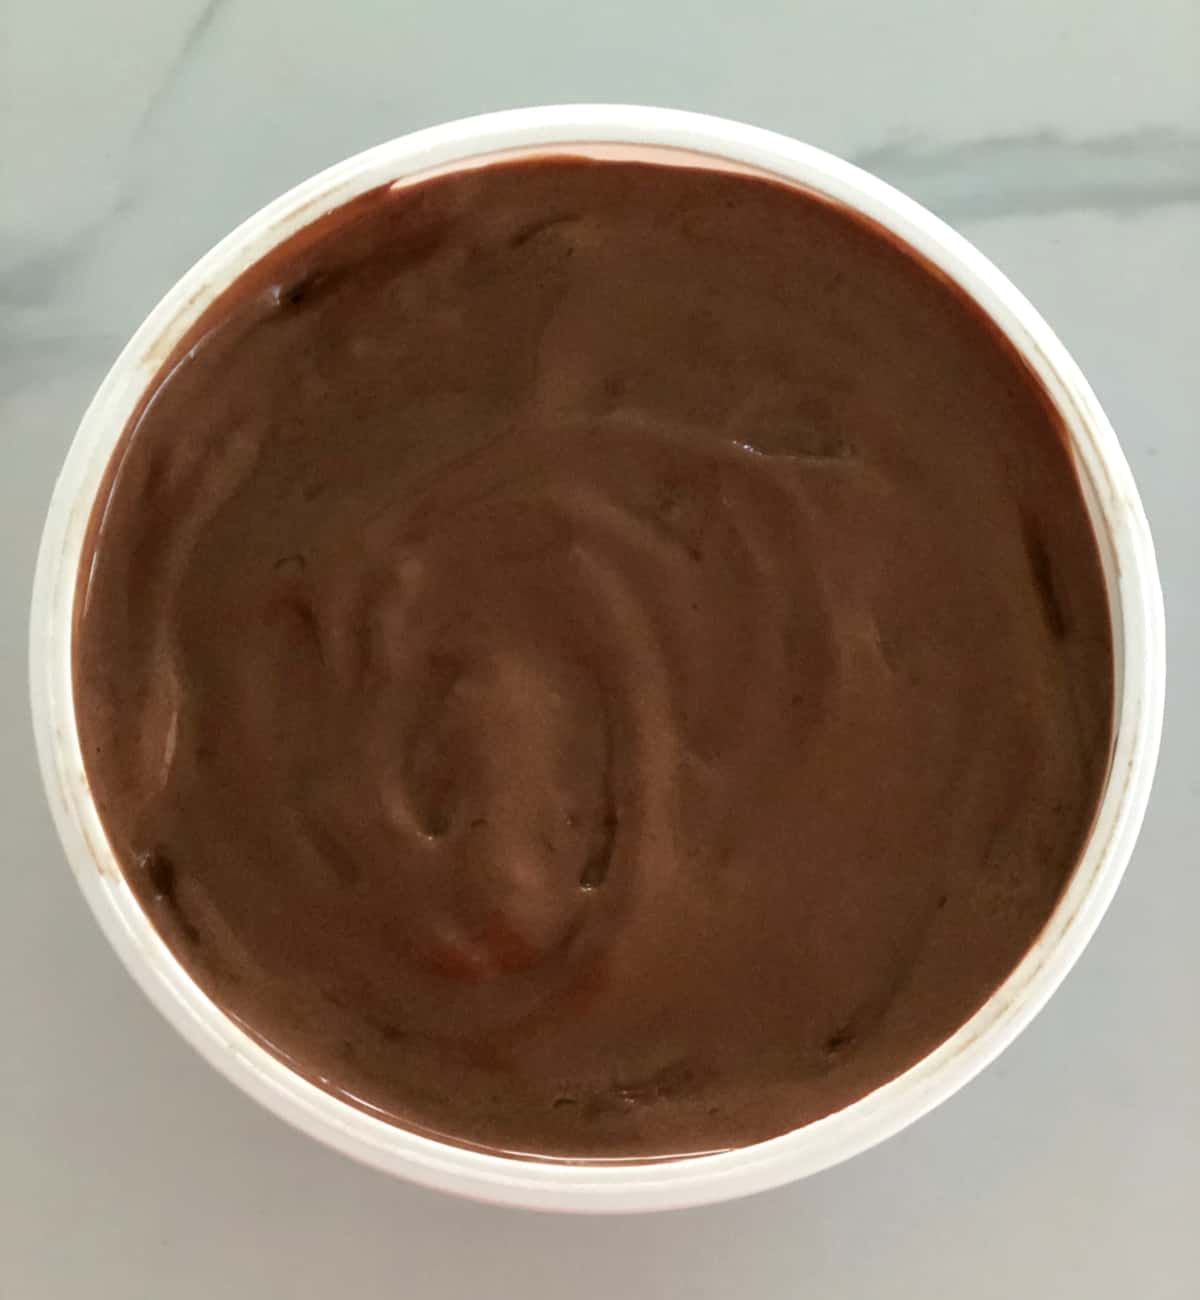 Unfrozen chocolate gelato in container from above.